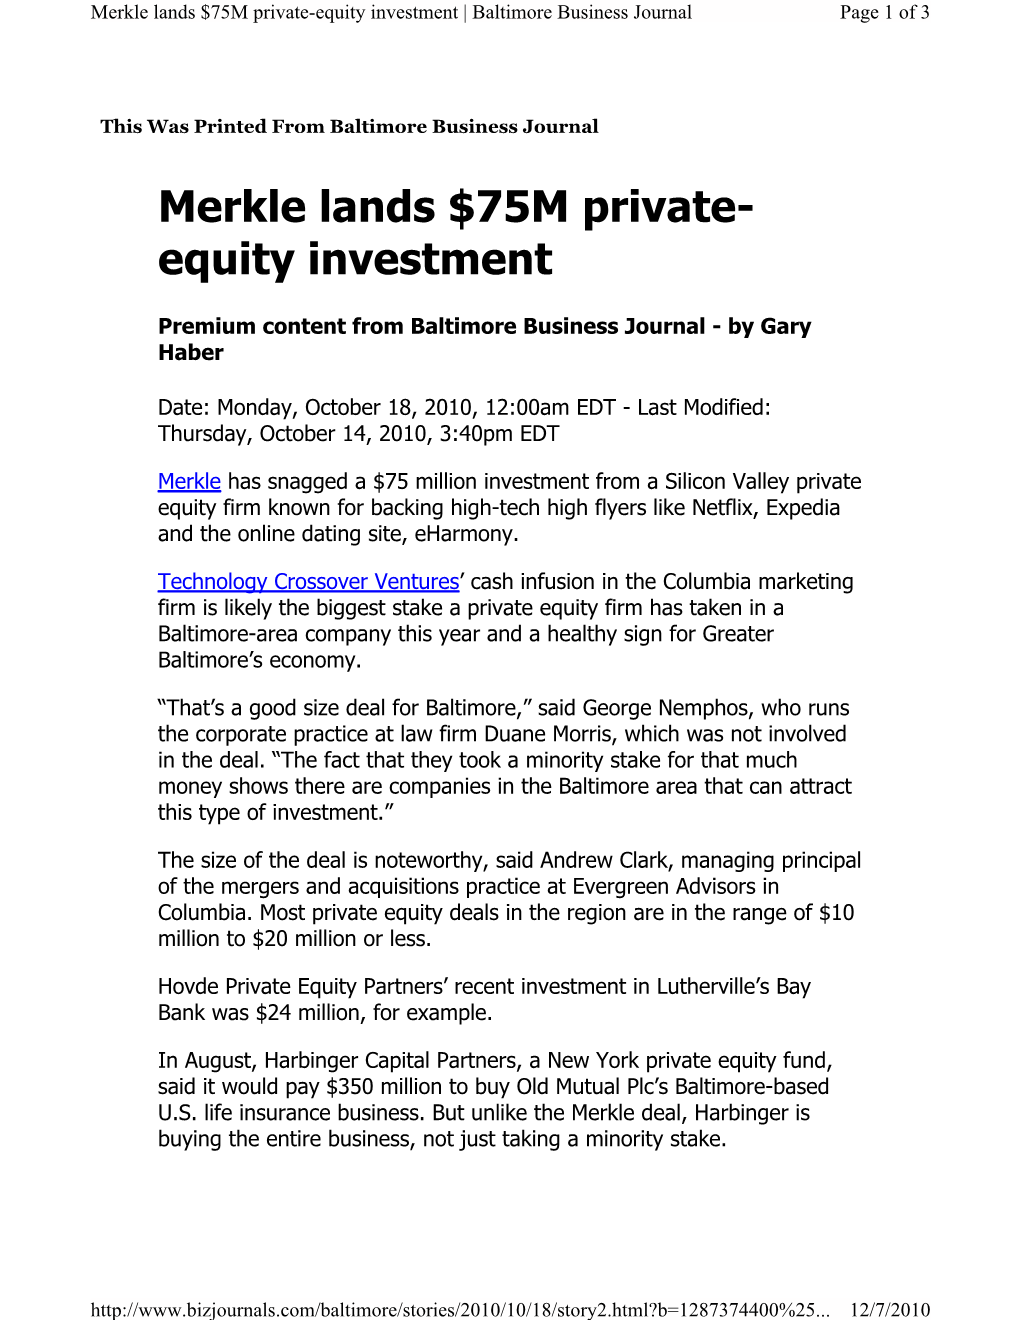 Merkle Lands $75M Private- Equity Investment